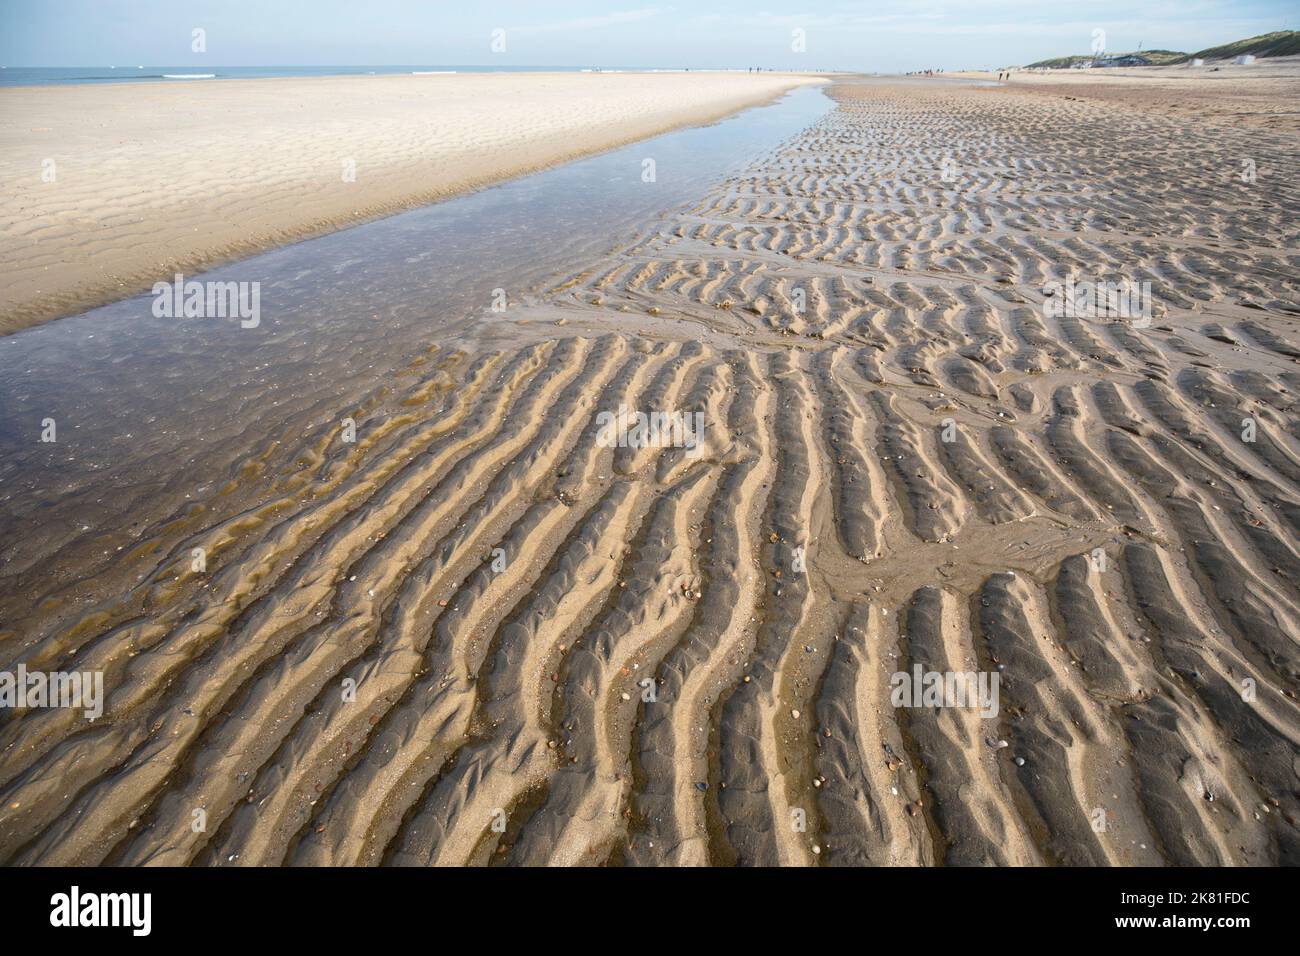 a tidal channel at the beach in Oostkapelle on the peninsula Walcheren, Zeeland, Netherlands. ein Priel am Strand von Oostkapelle auf Walcheren, Zeela Stock Photo